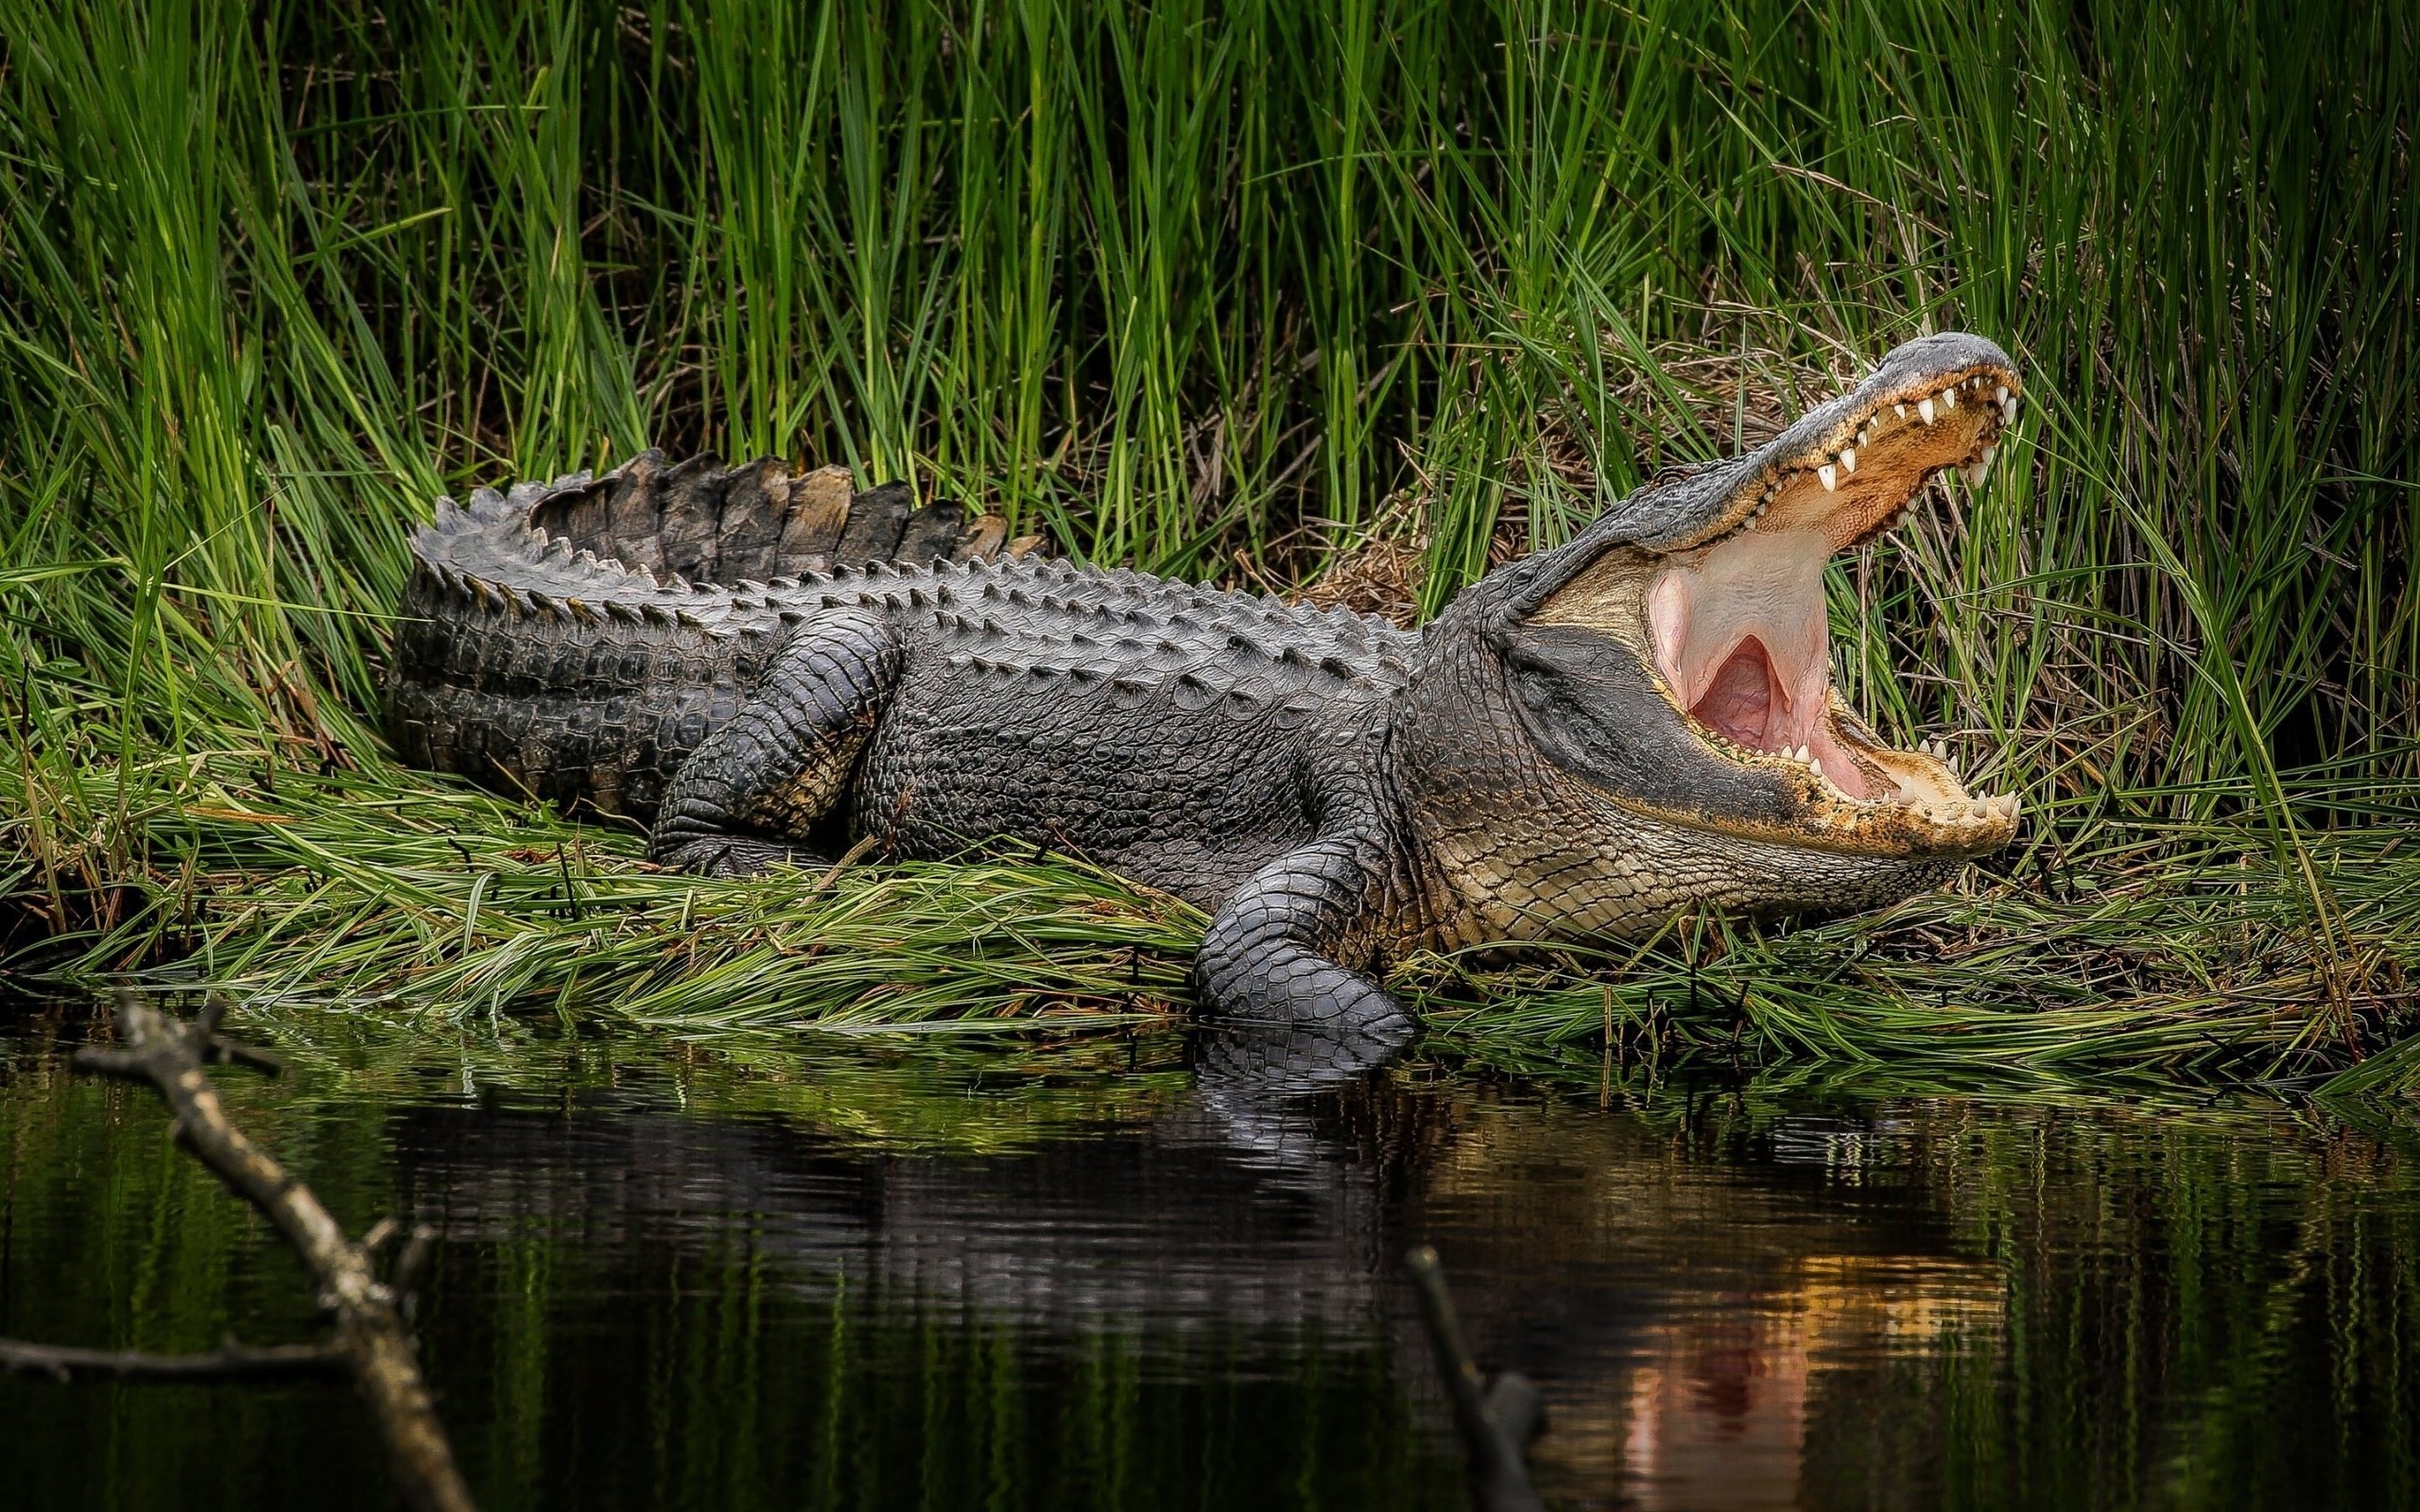 Crocodile: Alligator, Predator, Live along the edges of permanent bodies of water, such as lakes, swamps, and rivers. 2560x1600 HD Wallpaper.